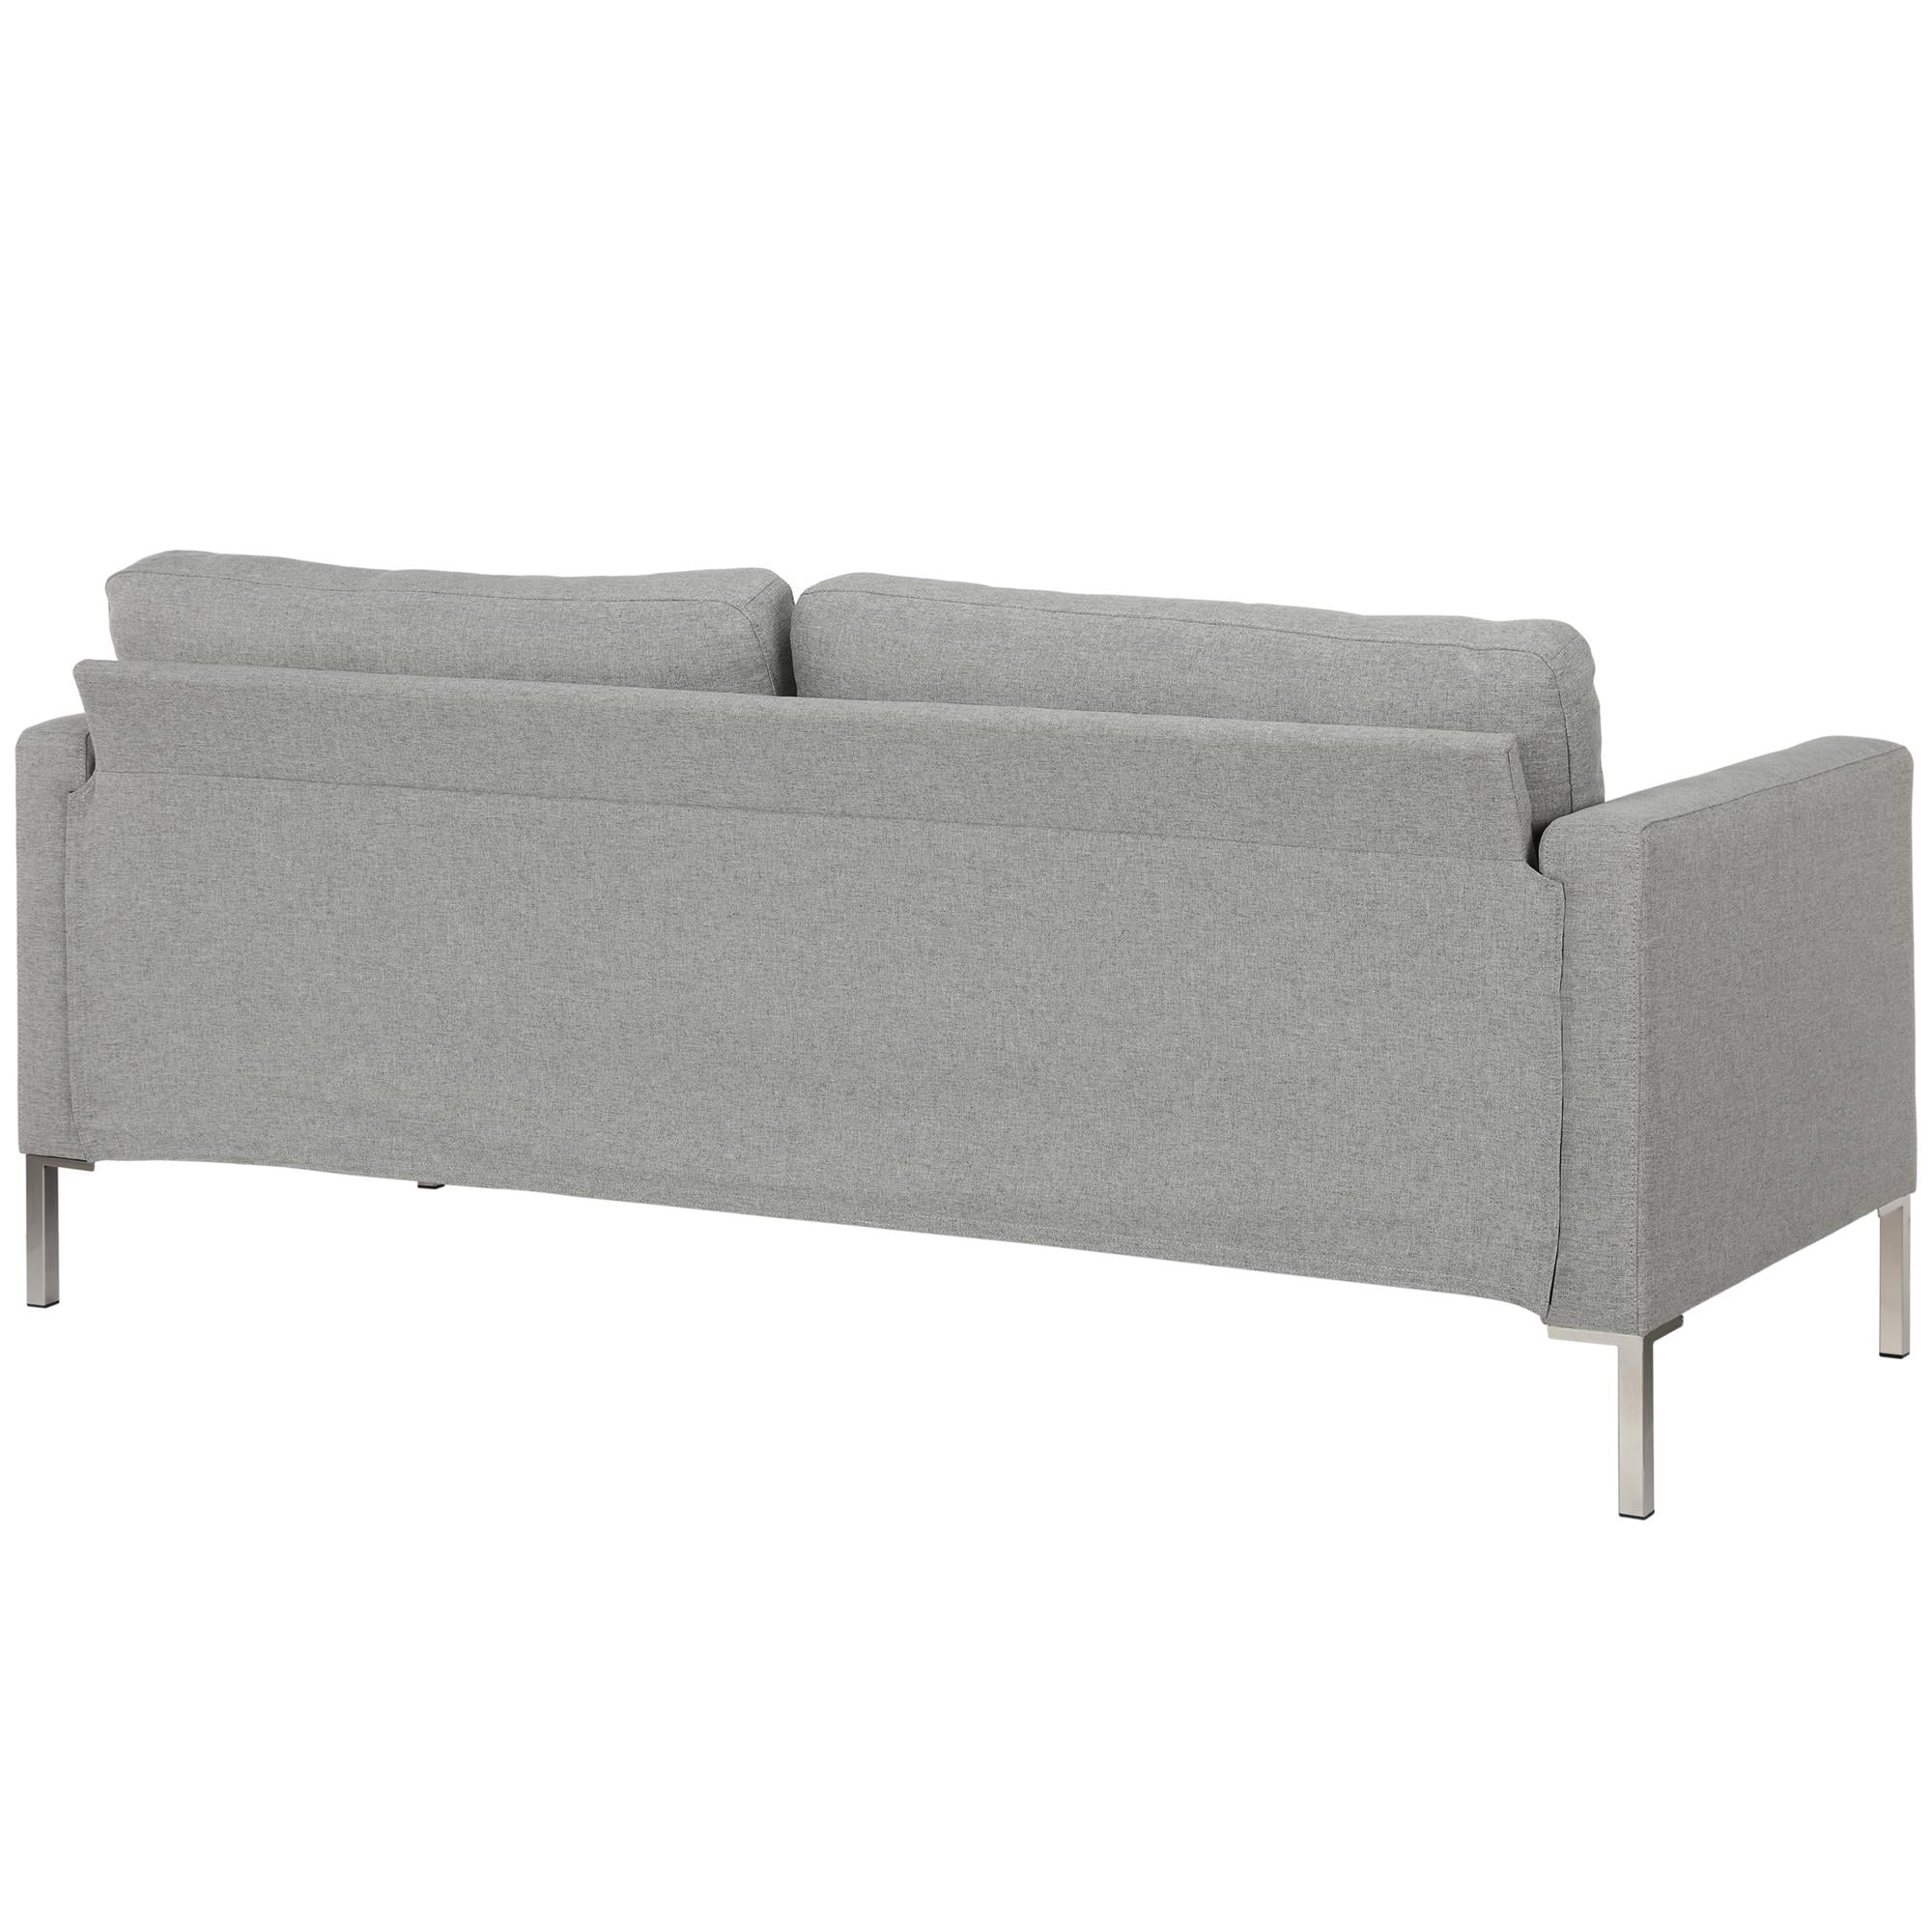 DHP Lexington Modern Sofa & Couch, Living Room Furniture, Gray Linen - image 12 of 15